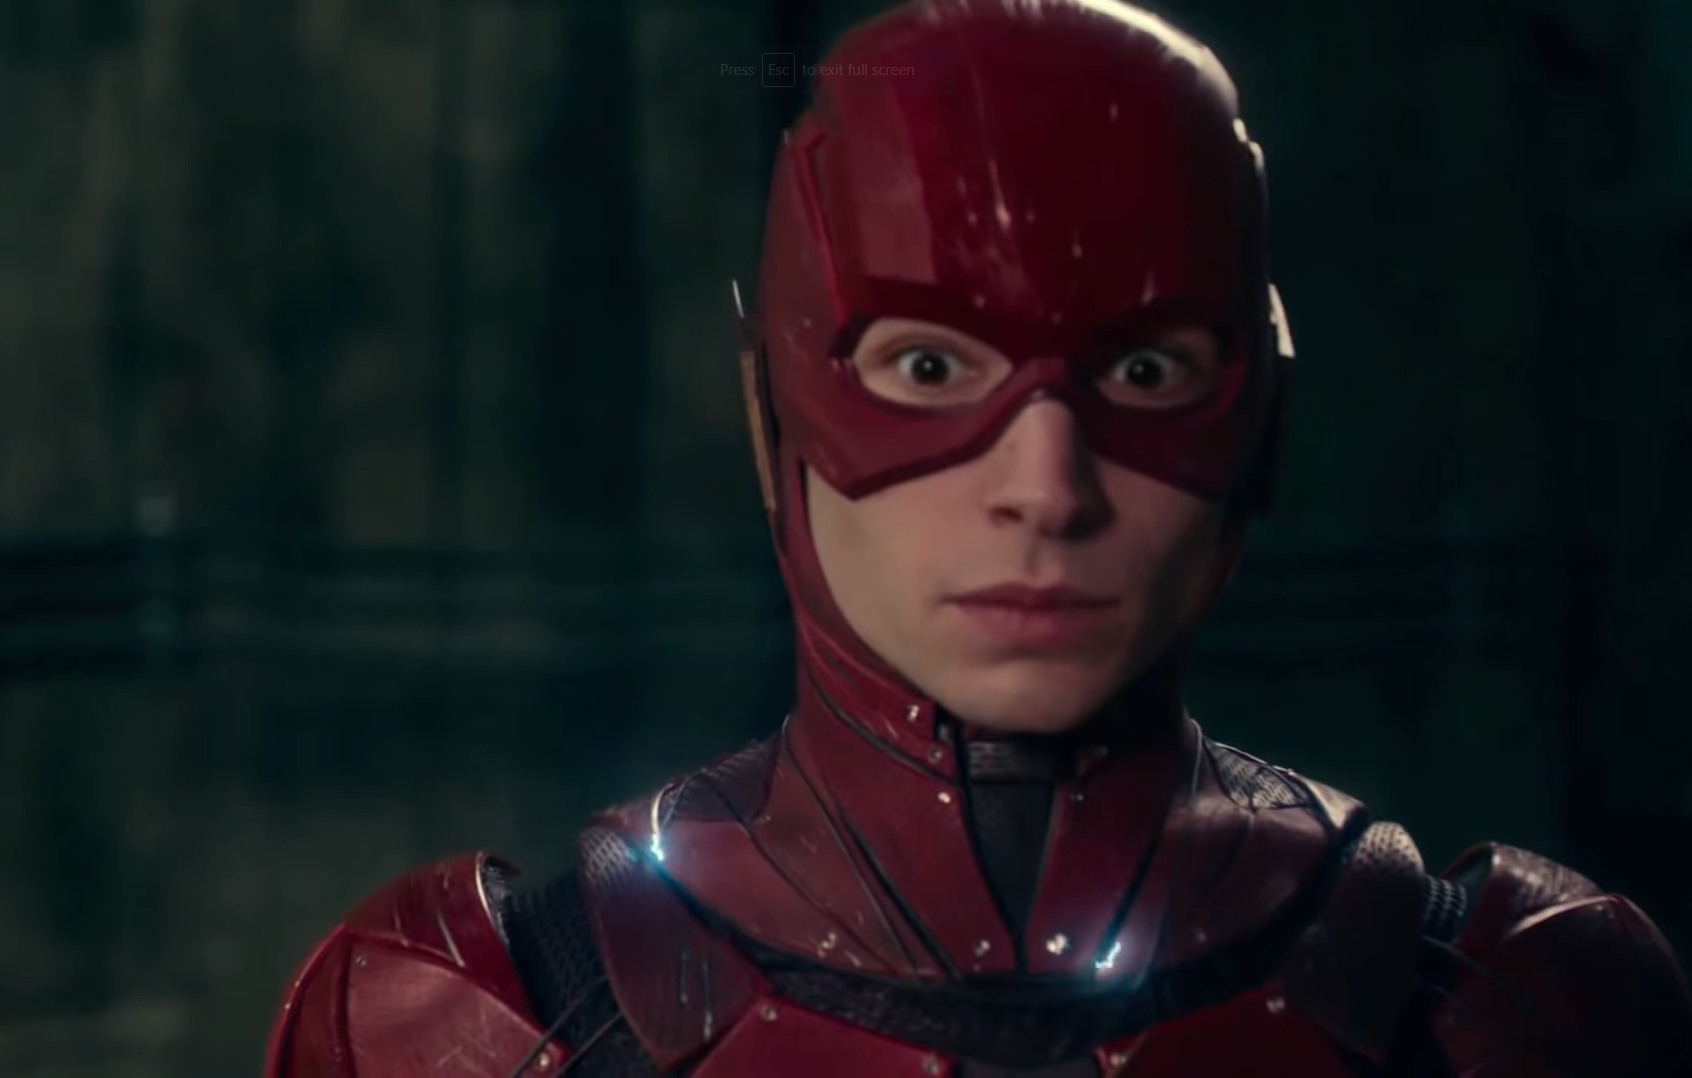 Warner Bros. management held an emergency meeting about The Flash